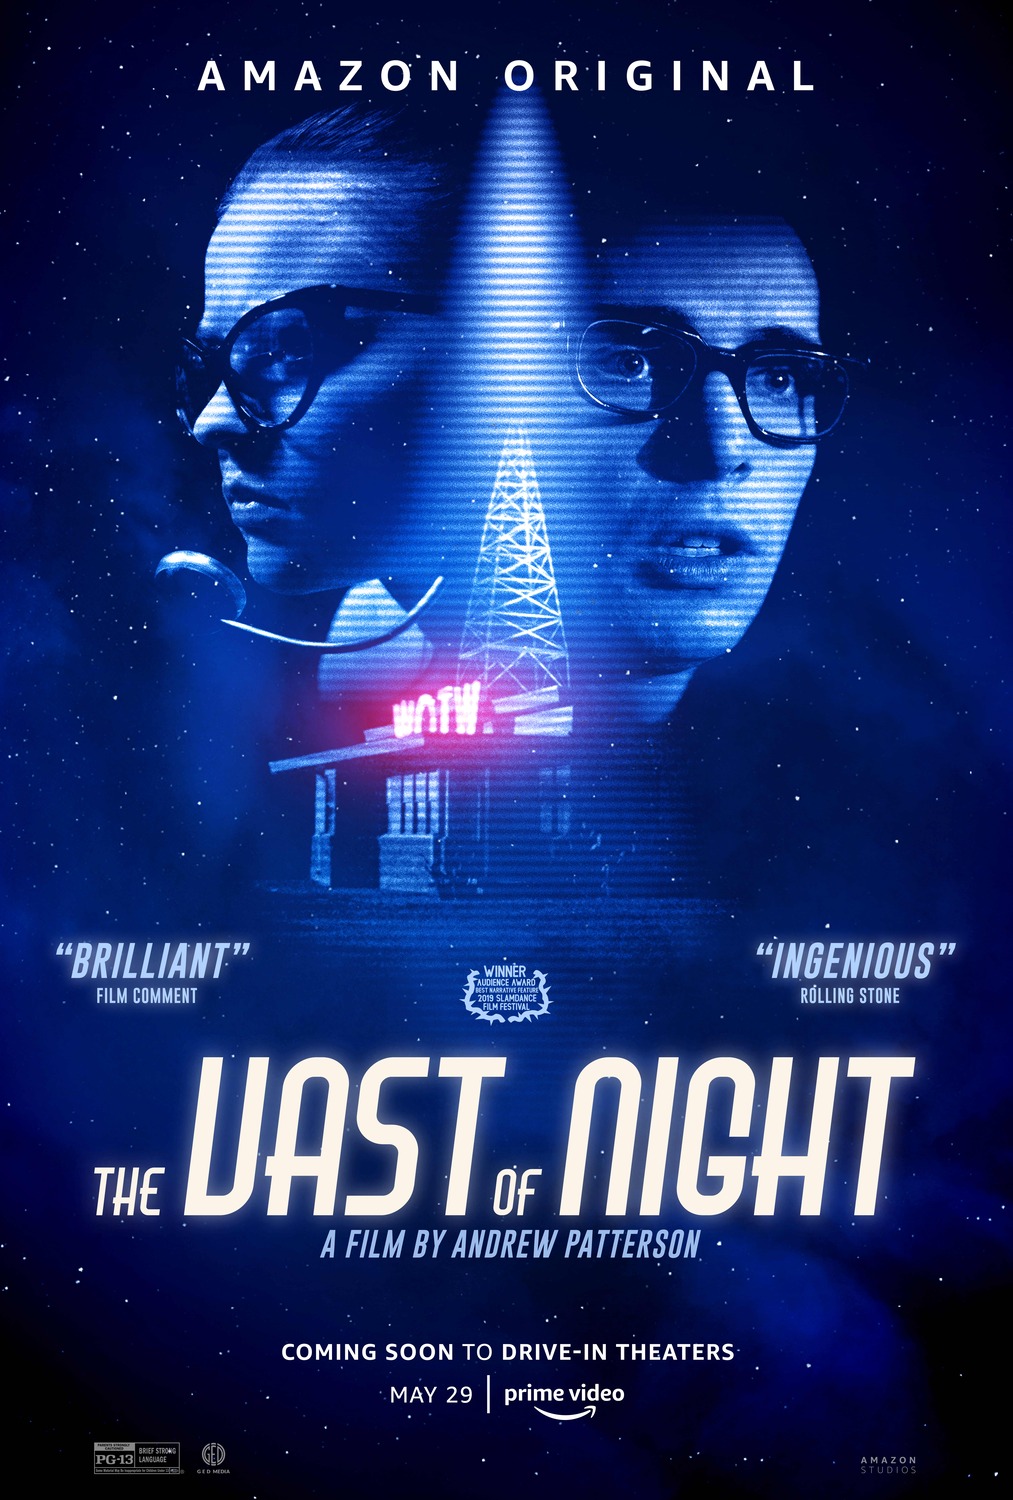 Extra Large Movie Poster Image for The Vast of Night (#2 of 2)